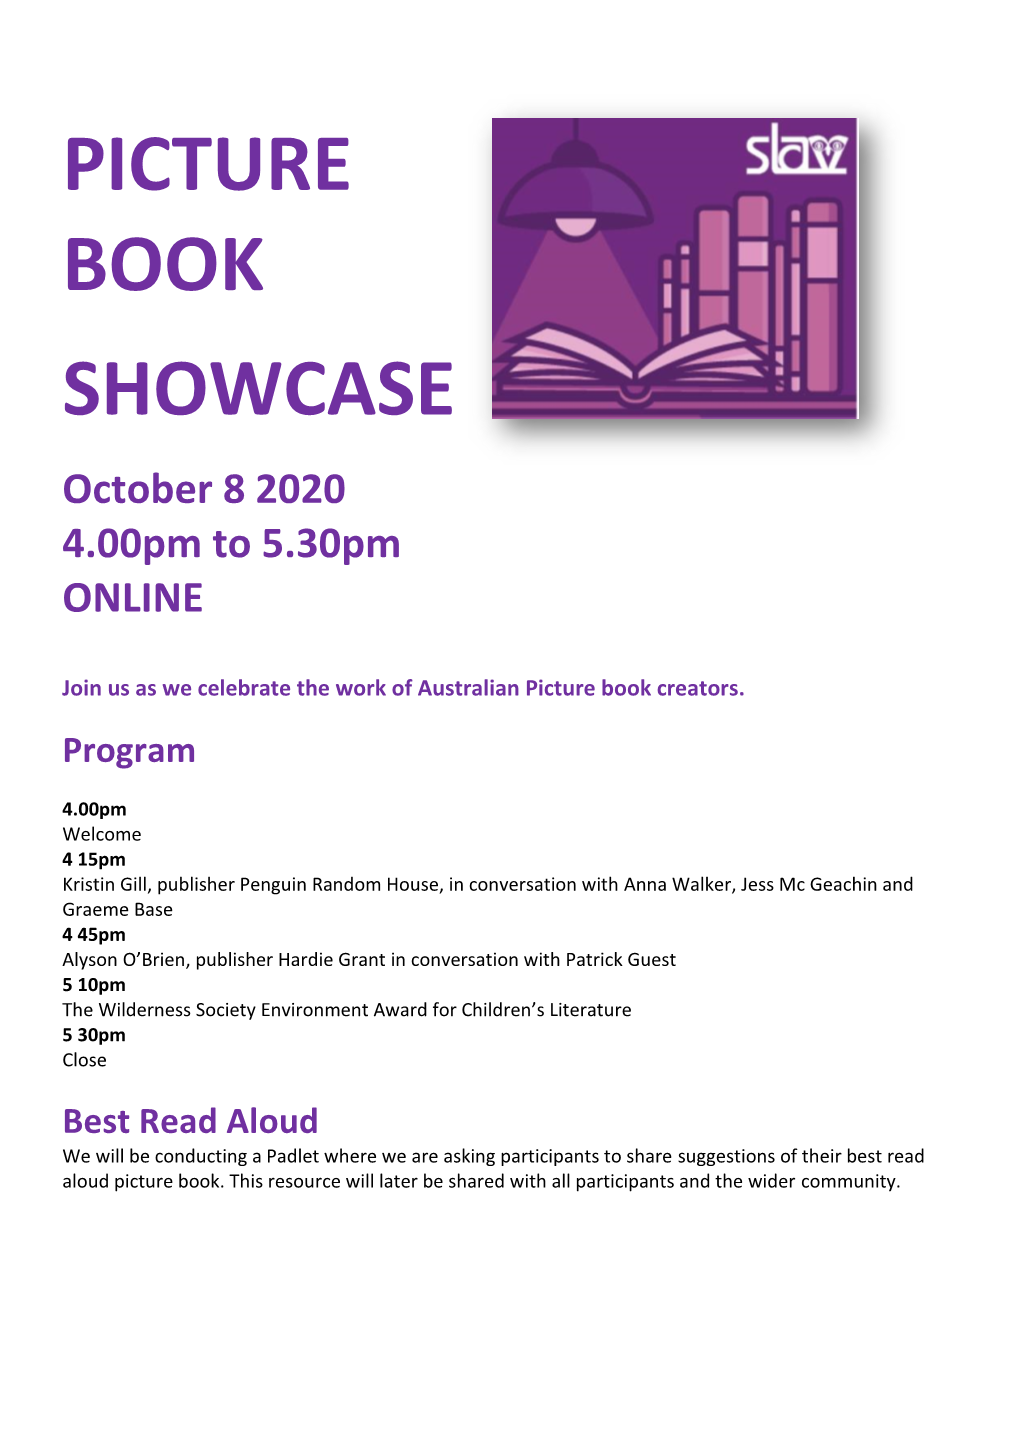 PICTURE BOOK SHOWCASE October 8 2020 4.00Pm to 5.30Pm ONLINE